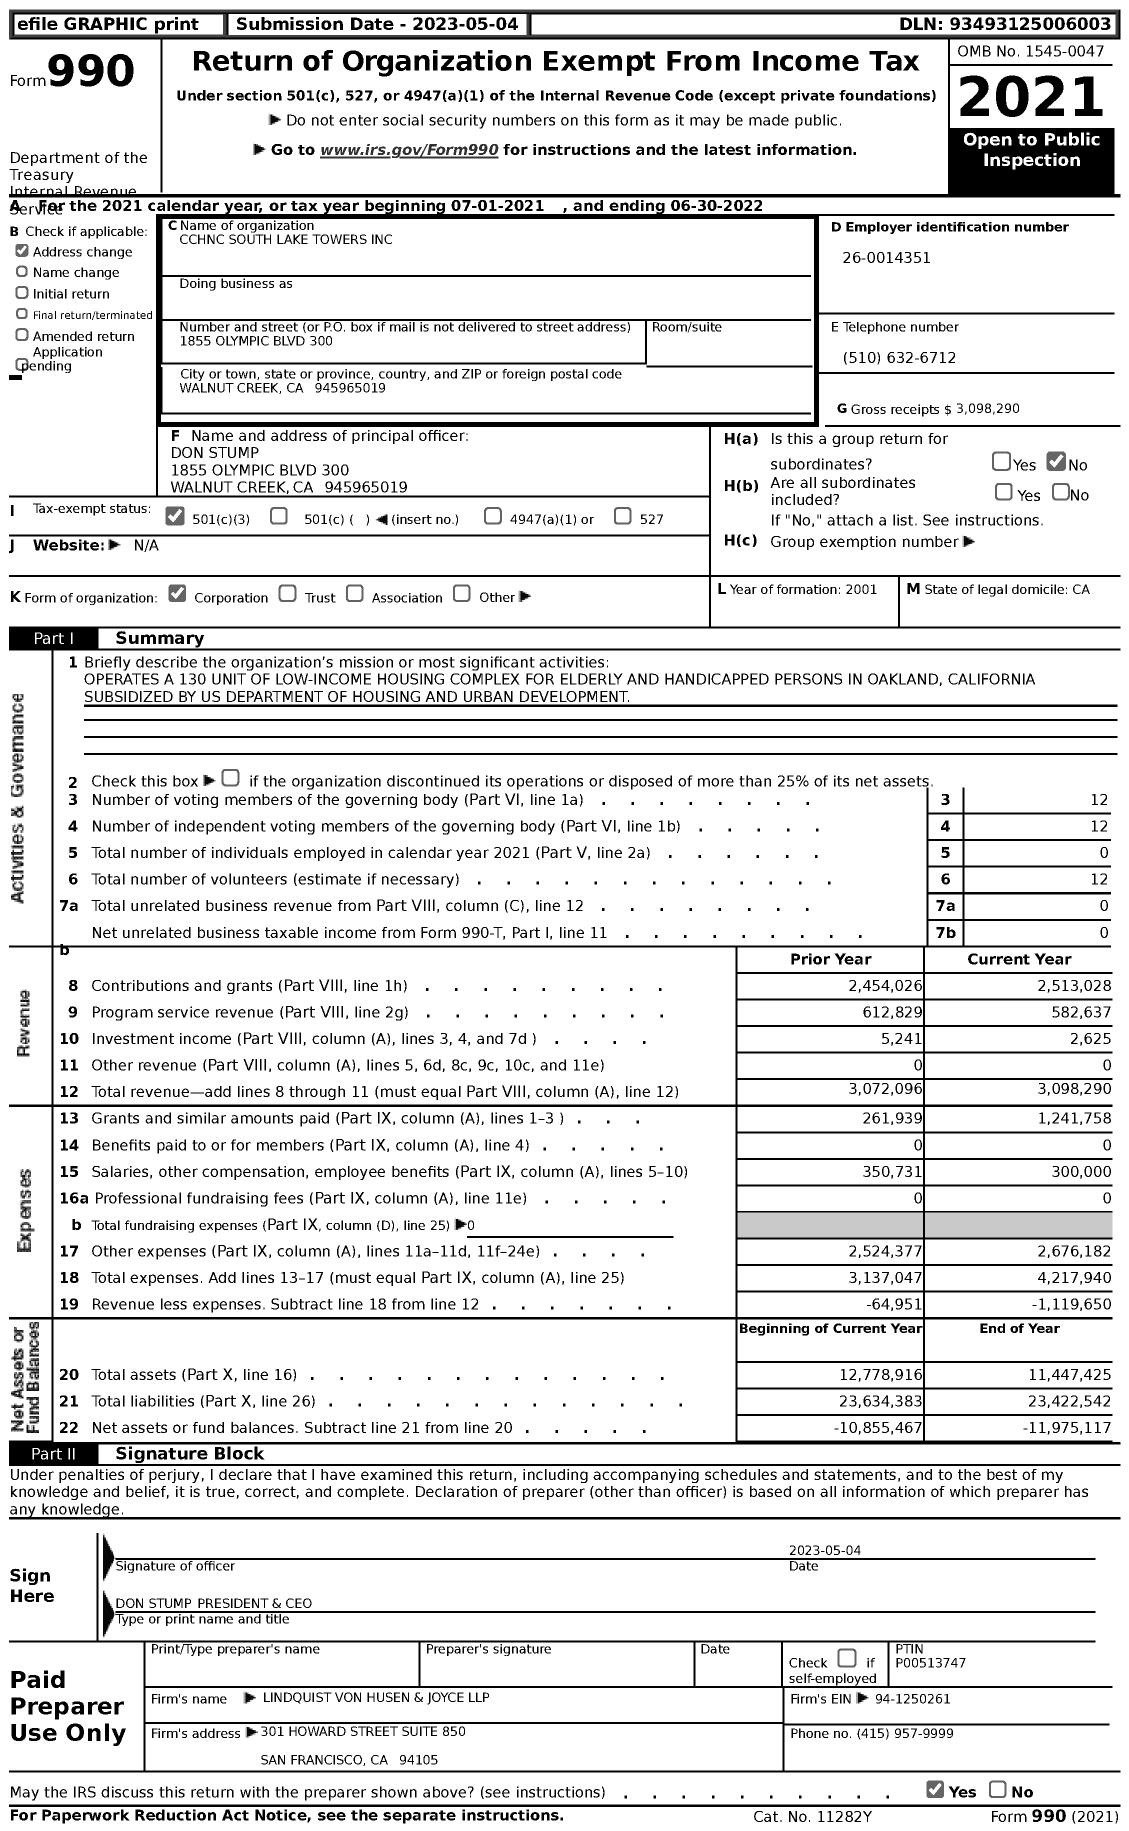 Image of first page of 2021 Form 990 for CCHNC South Lake Towers